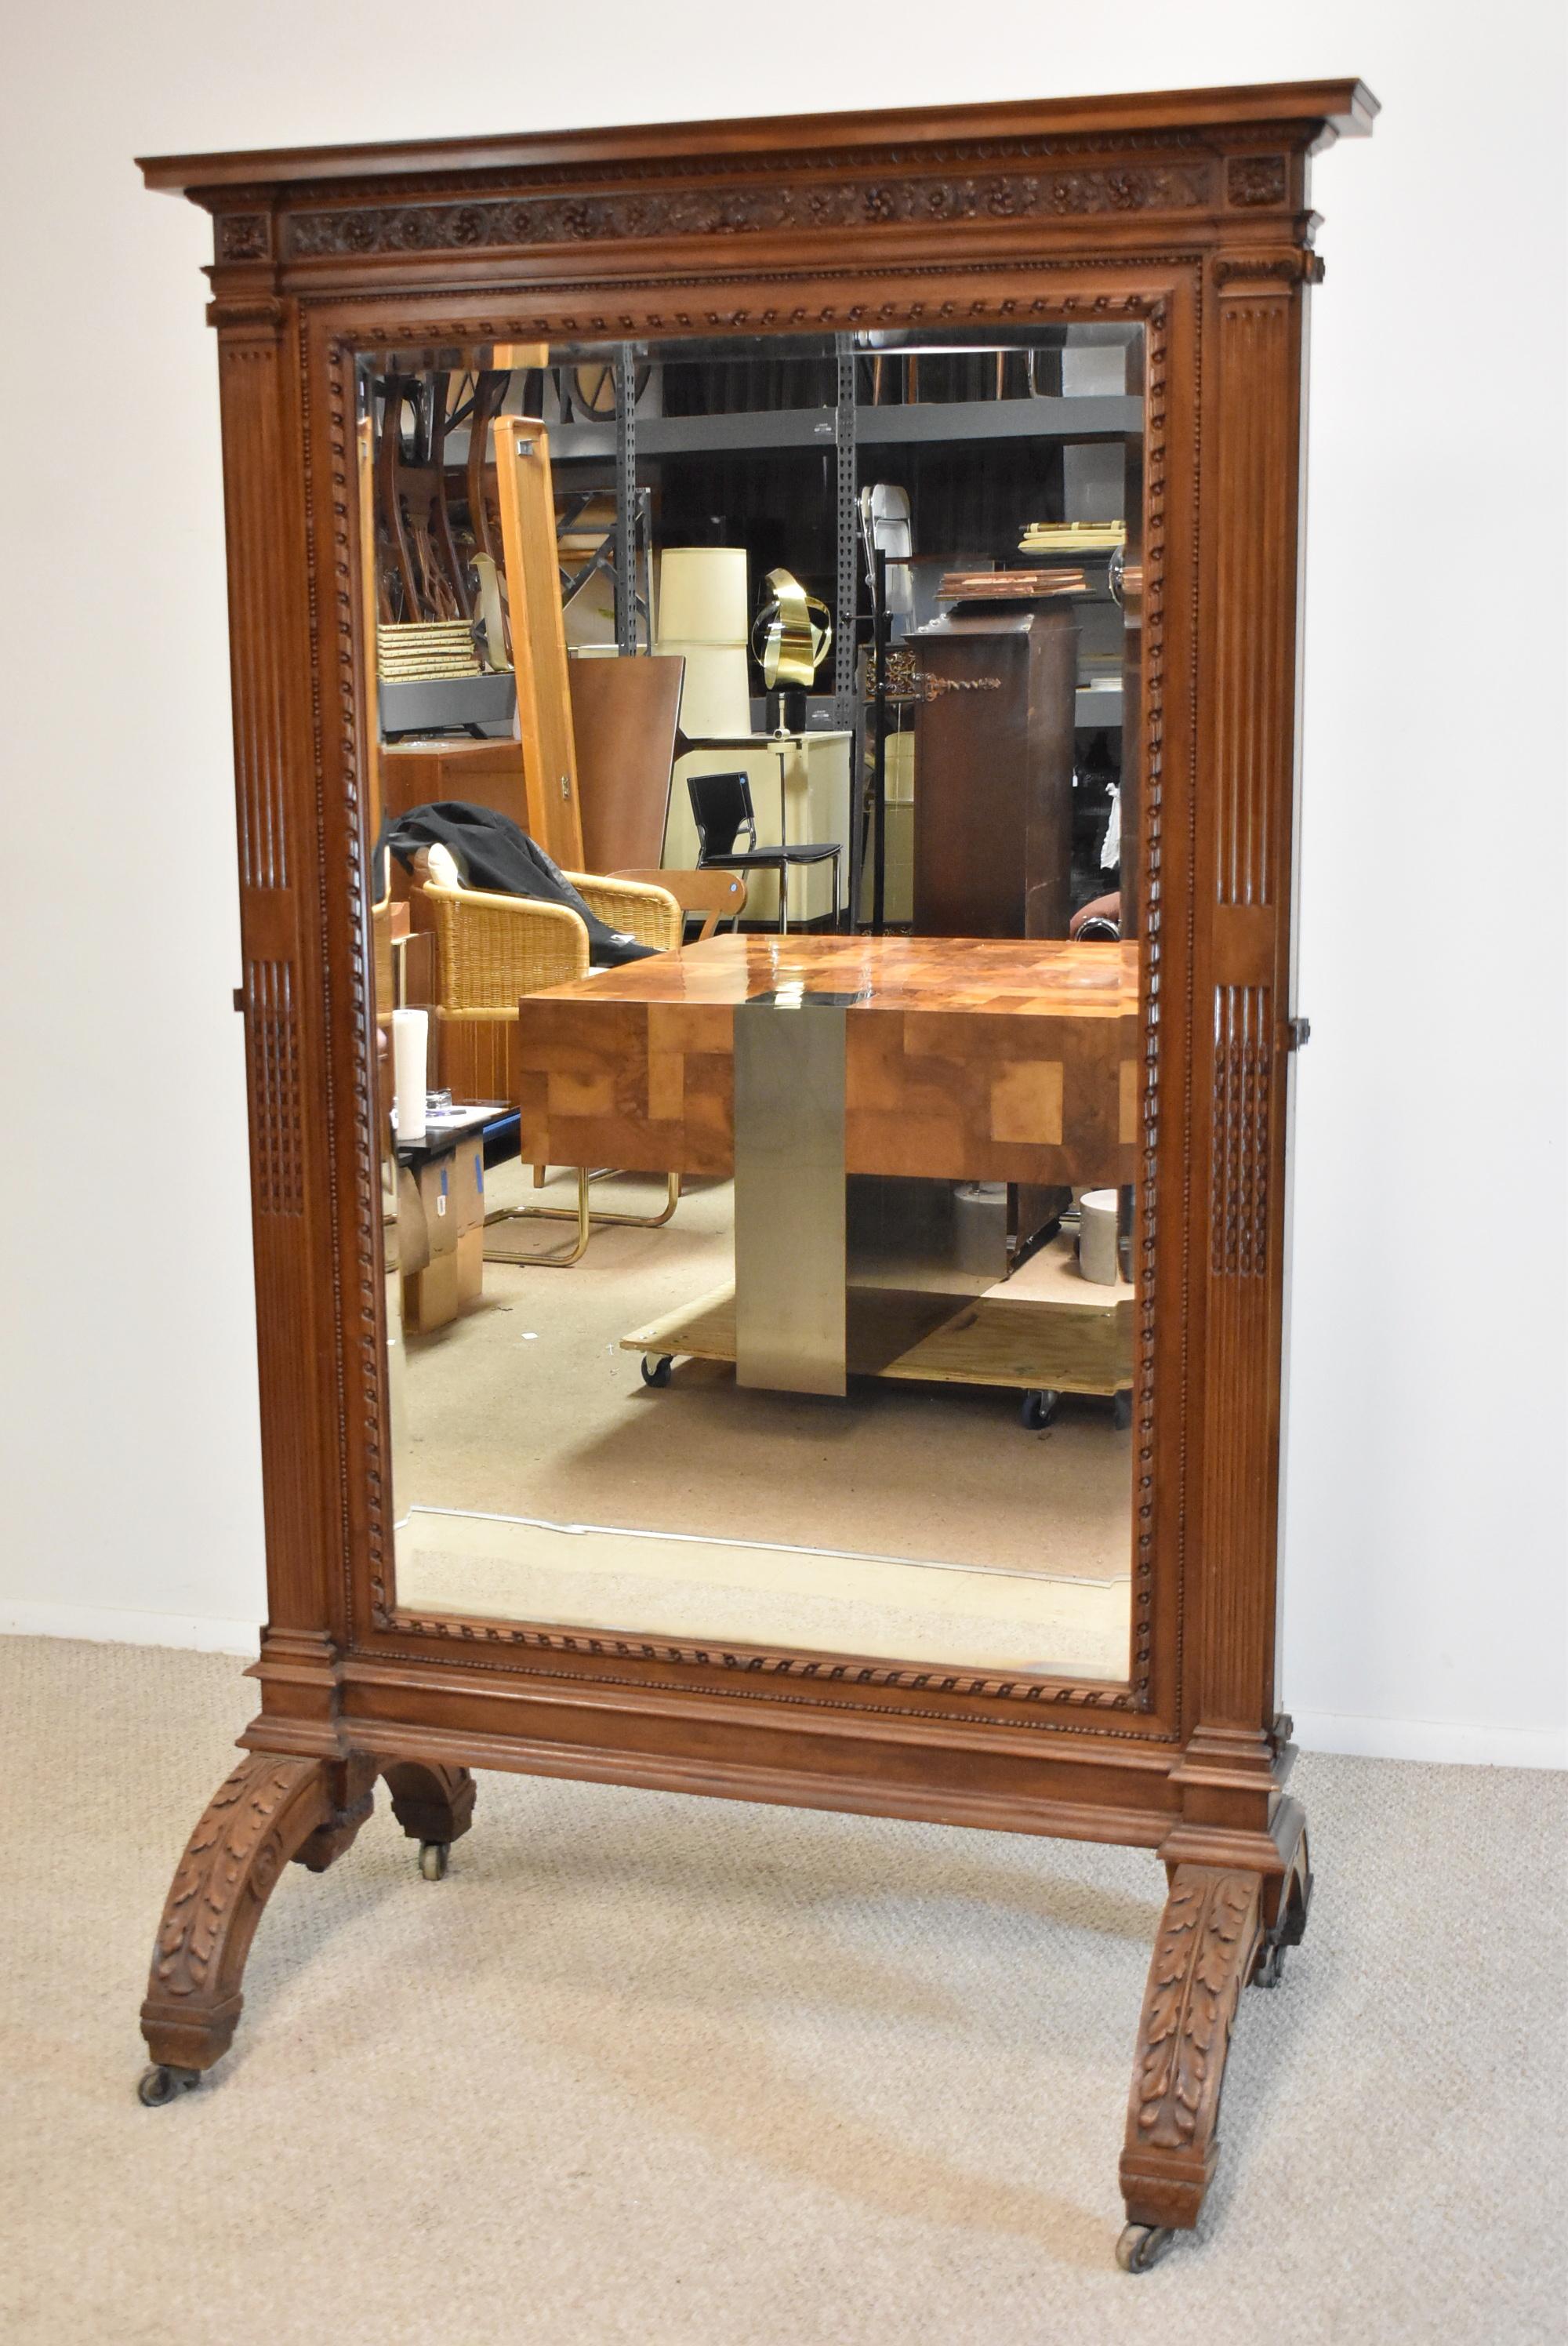 Antique walnut Cheval dressing full length triple mirror circa 1890's. Nicely carved frame. Three beveled mirrors. Large floor castors on the legs. Side hinged mirrors open to 91